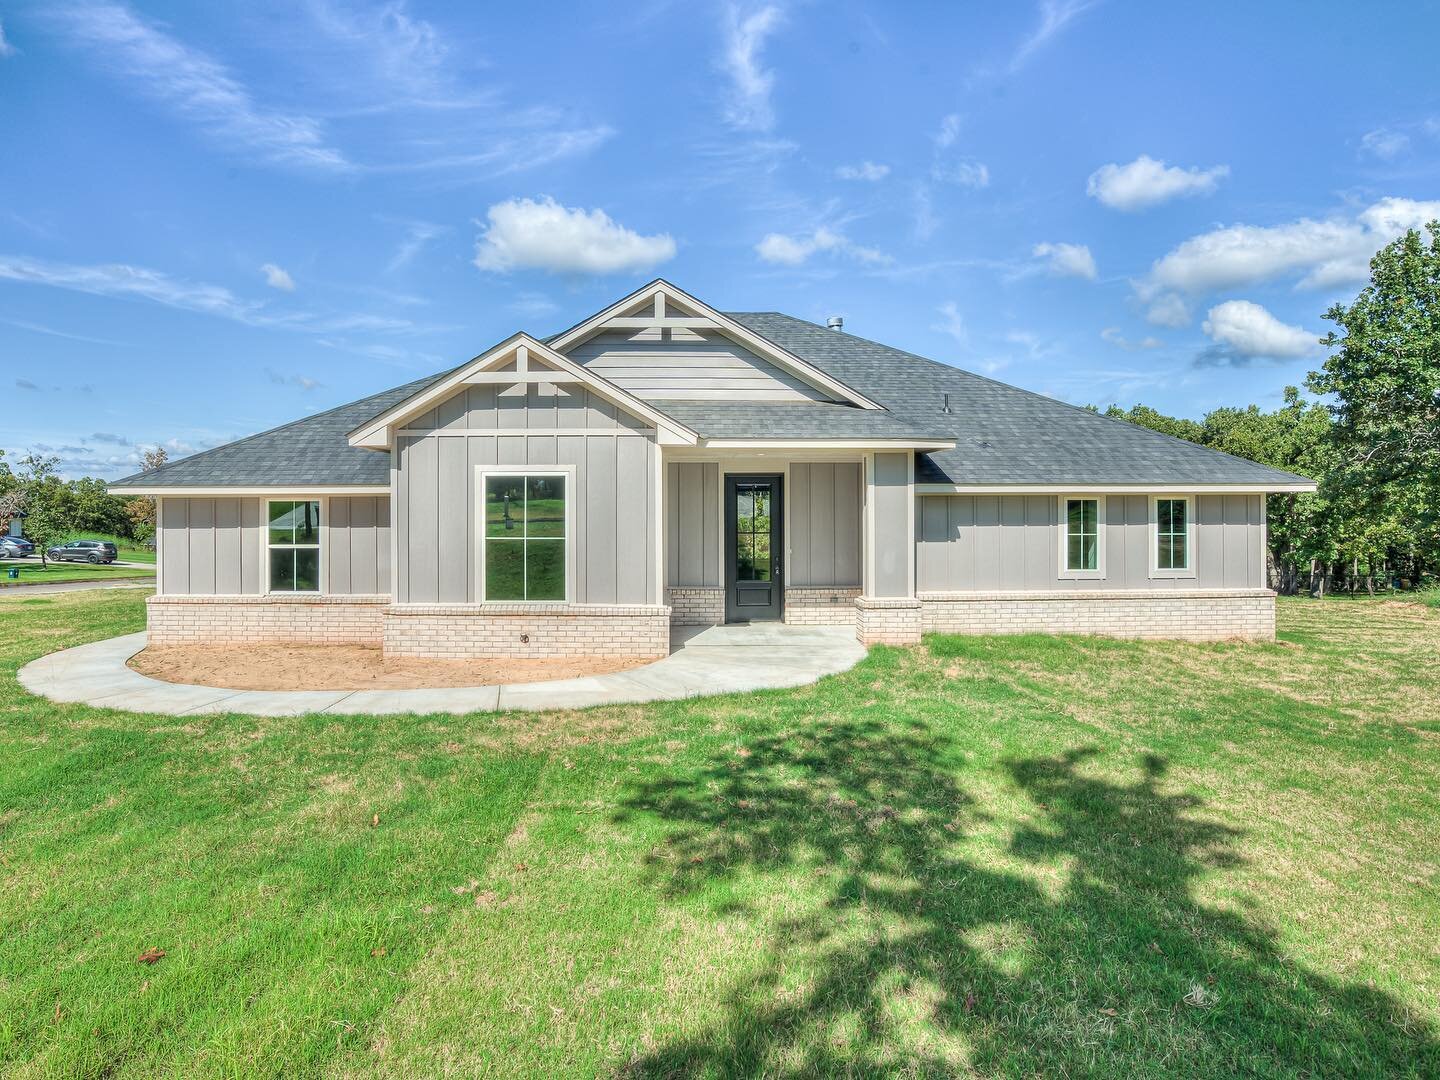 Beautiful new 3 bedroom / 3 bathroom / 3 car garage + Study on 1 acre wooded lot

9517 Conners Way
McLoud, OK

Listed at $419,900

Contact Berry Sheffield for more information or to schedule a showing (405)550-4349